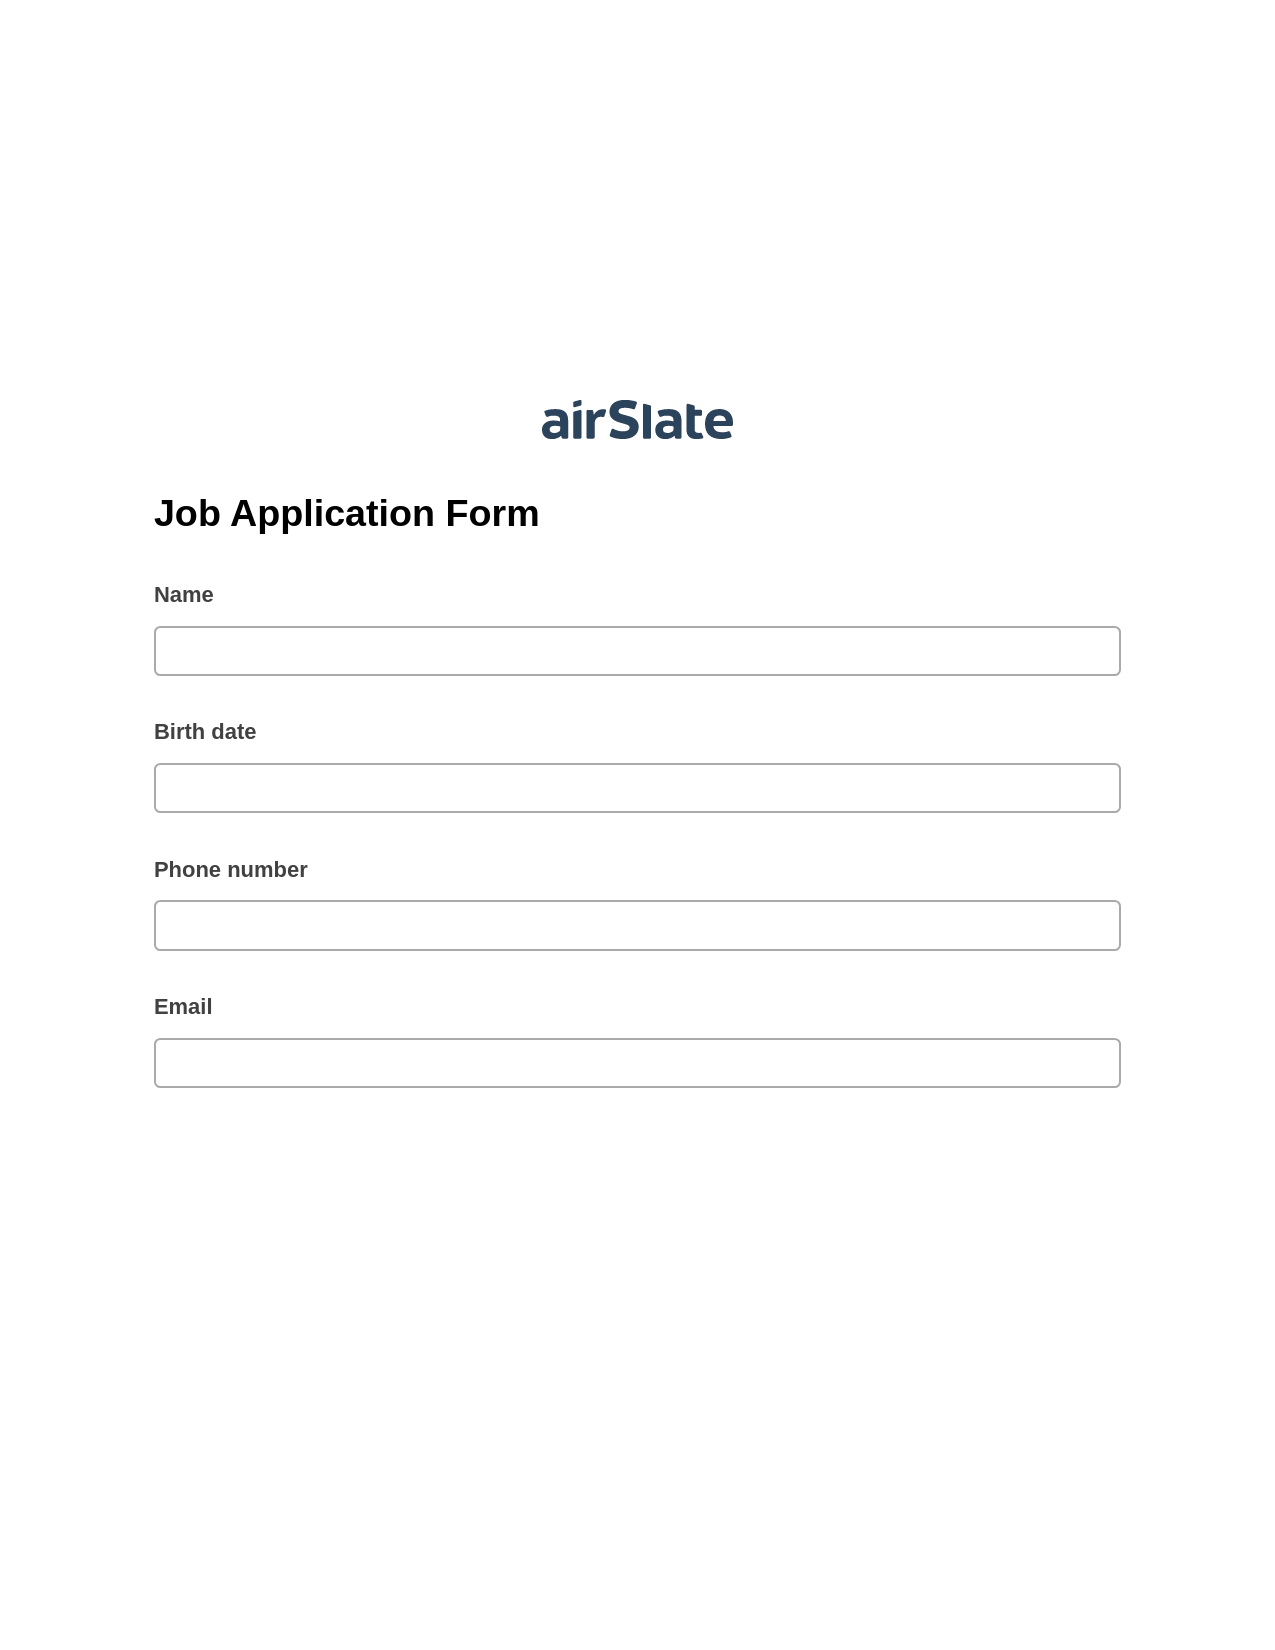 Job Application Form Pre-fill from Google Sheet Dropdown Options Bot, System Bot - Create a Slate in another Flow, Export to Formstack Documents Bot